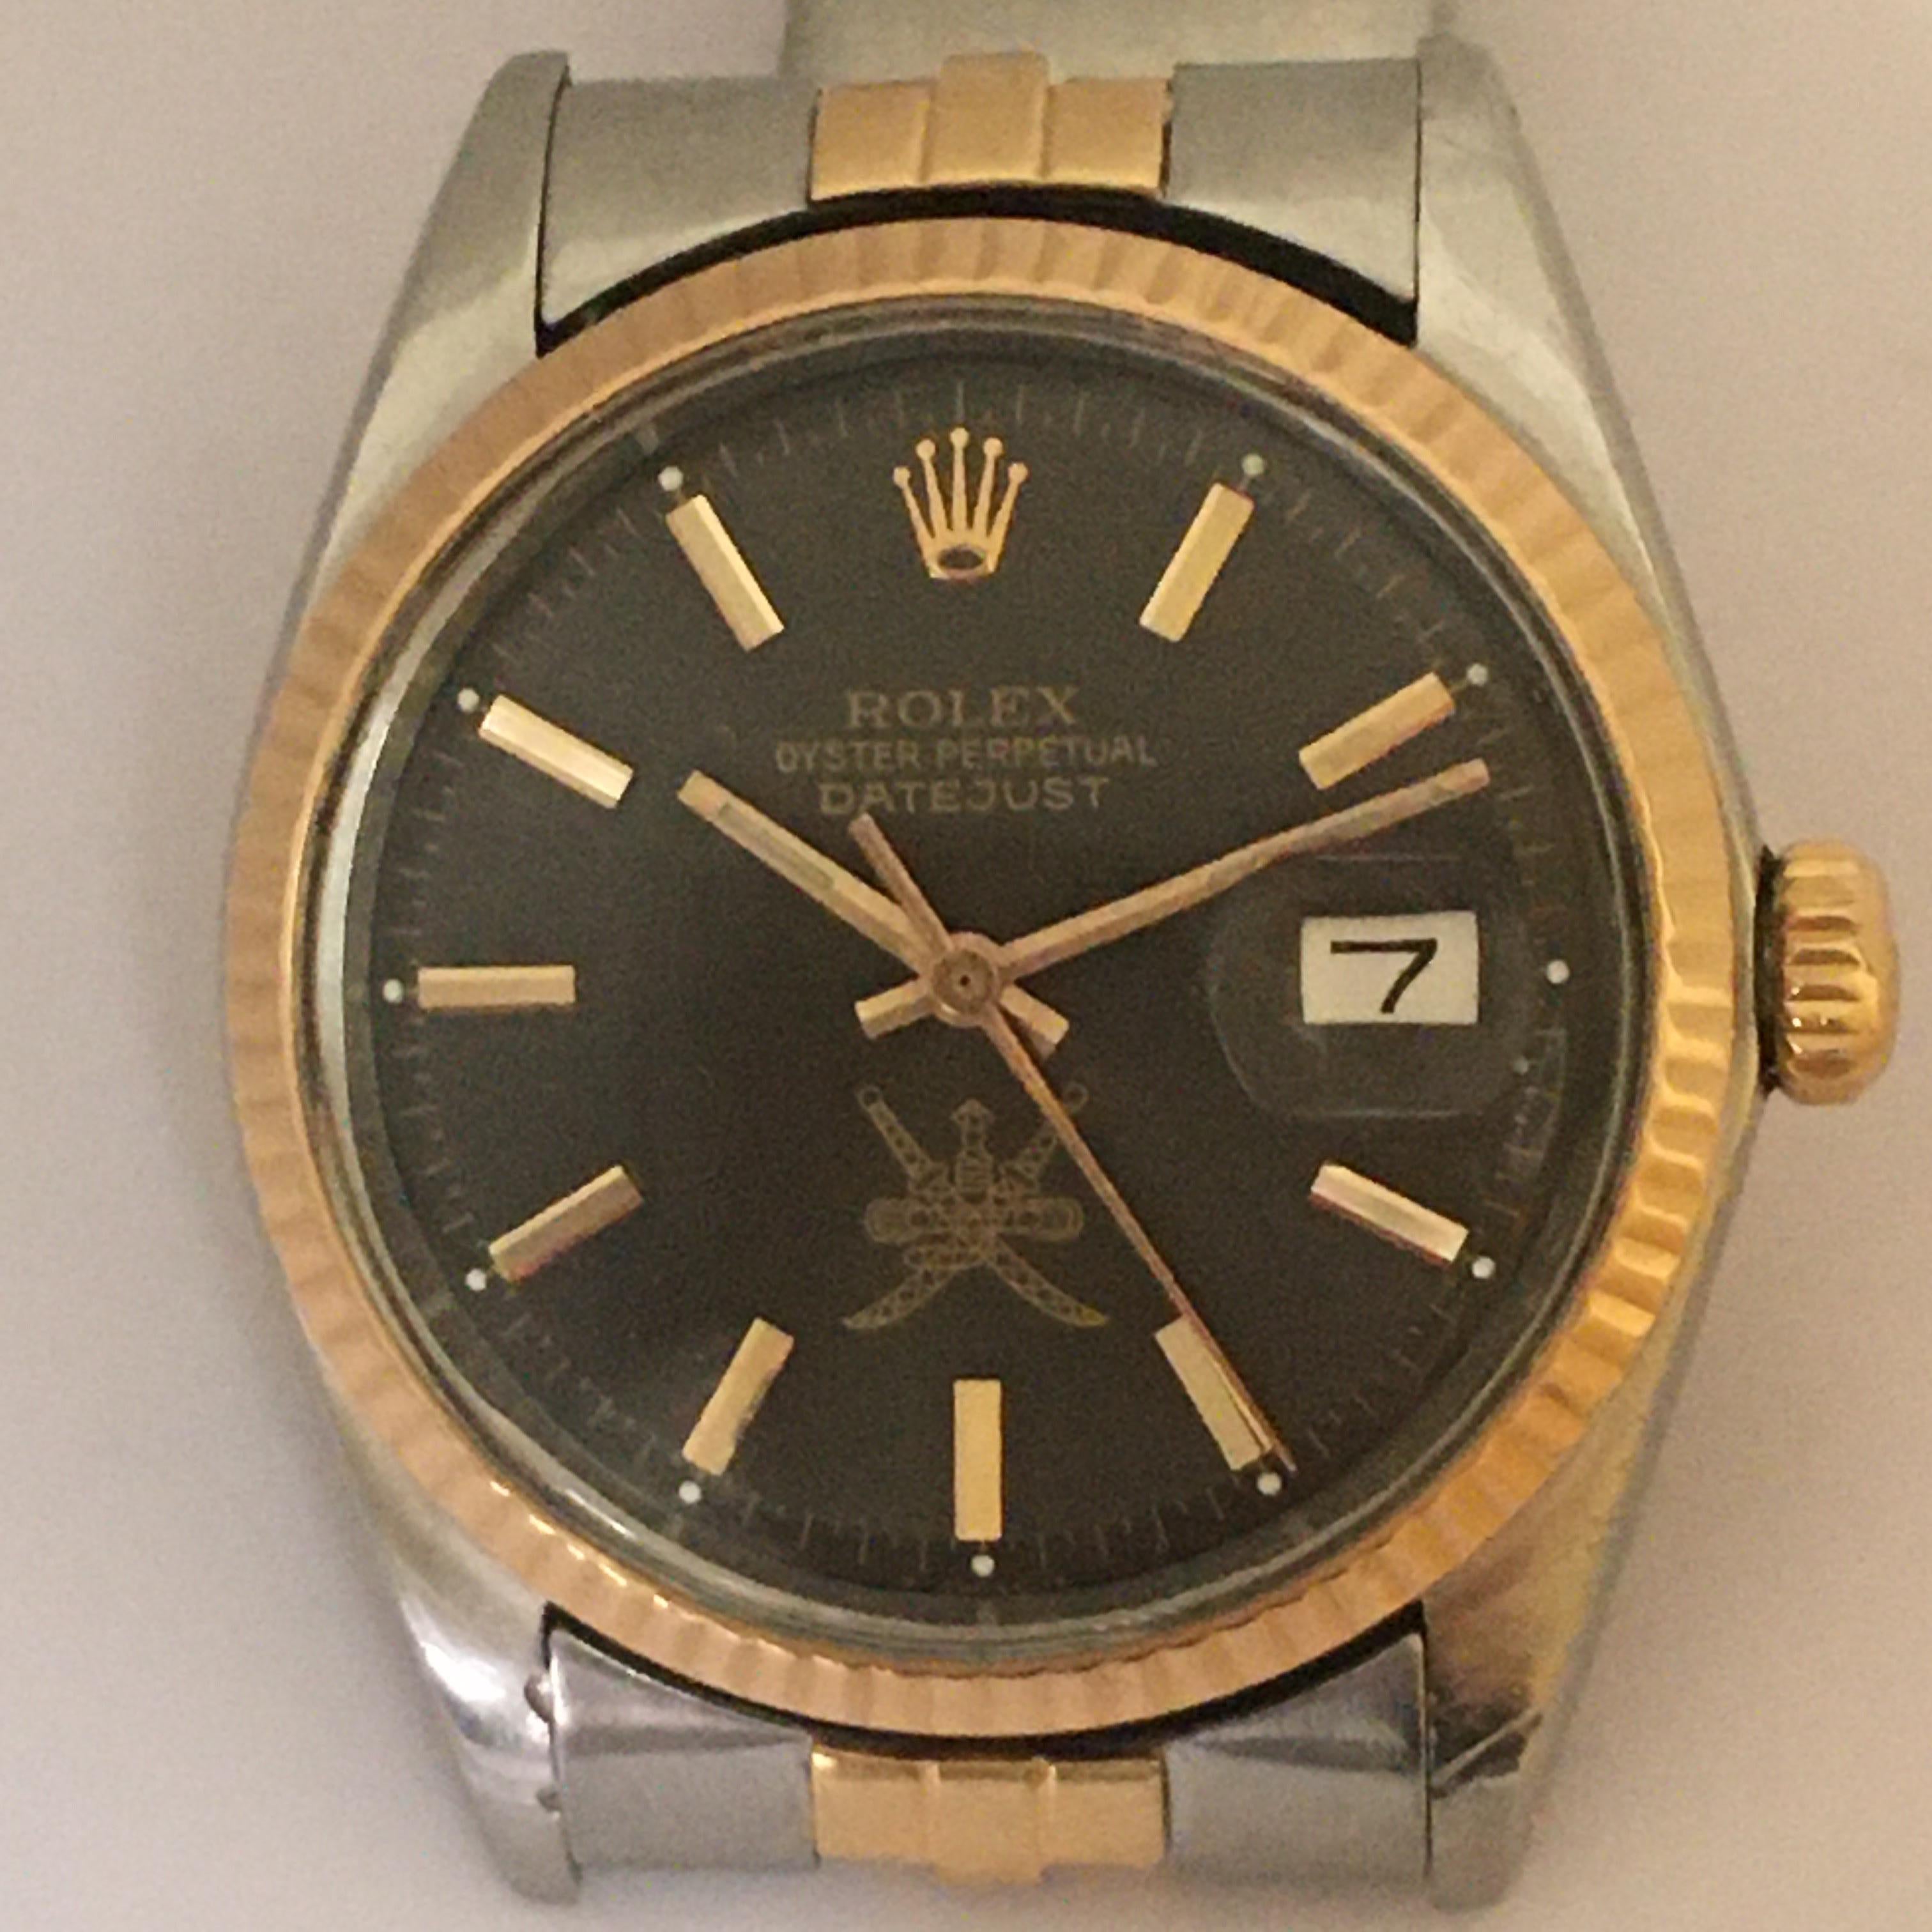 1974 Gent's Rolex Date Just Khanjar Black خنجر Dial 18K Two Tone Watch Ref 1603 For Sale 4